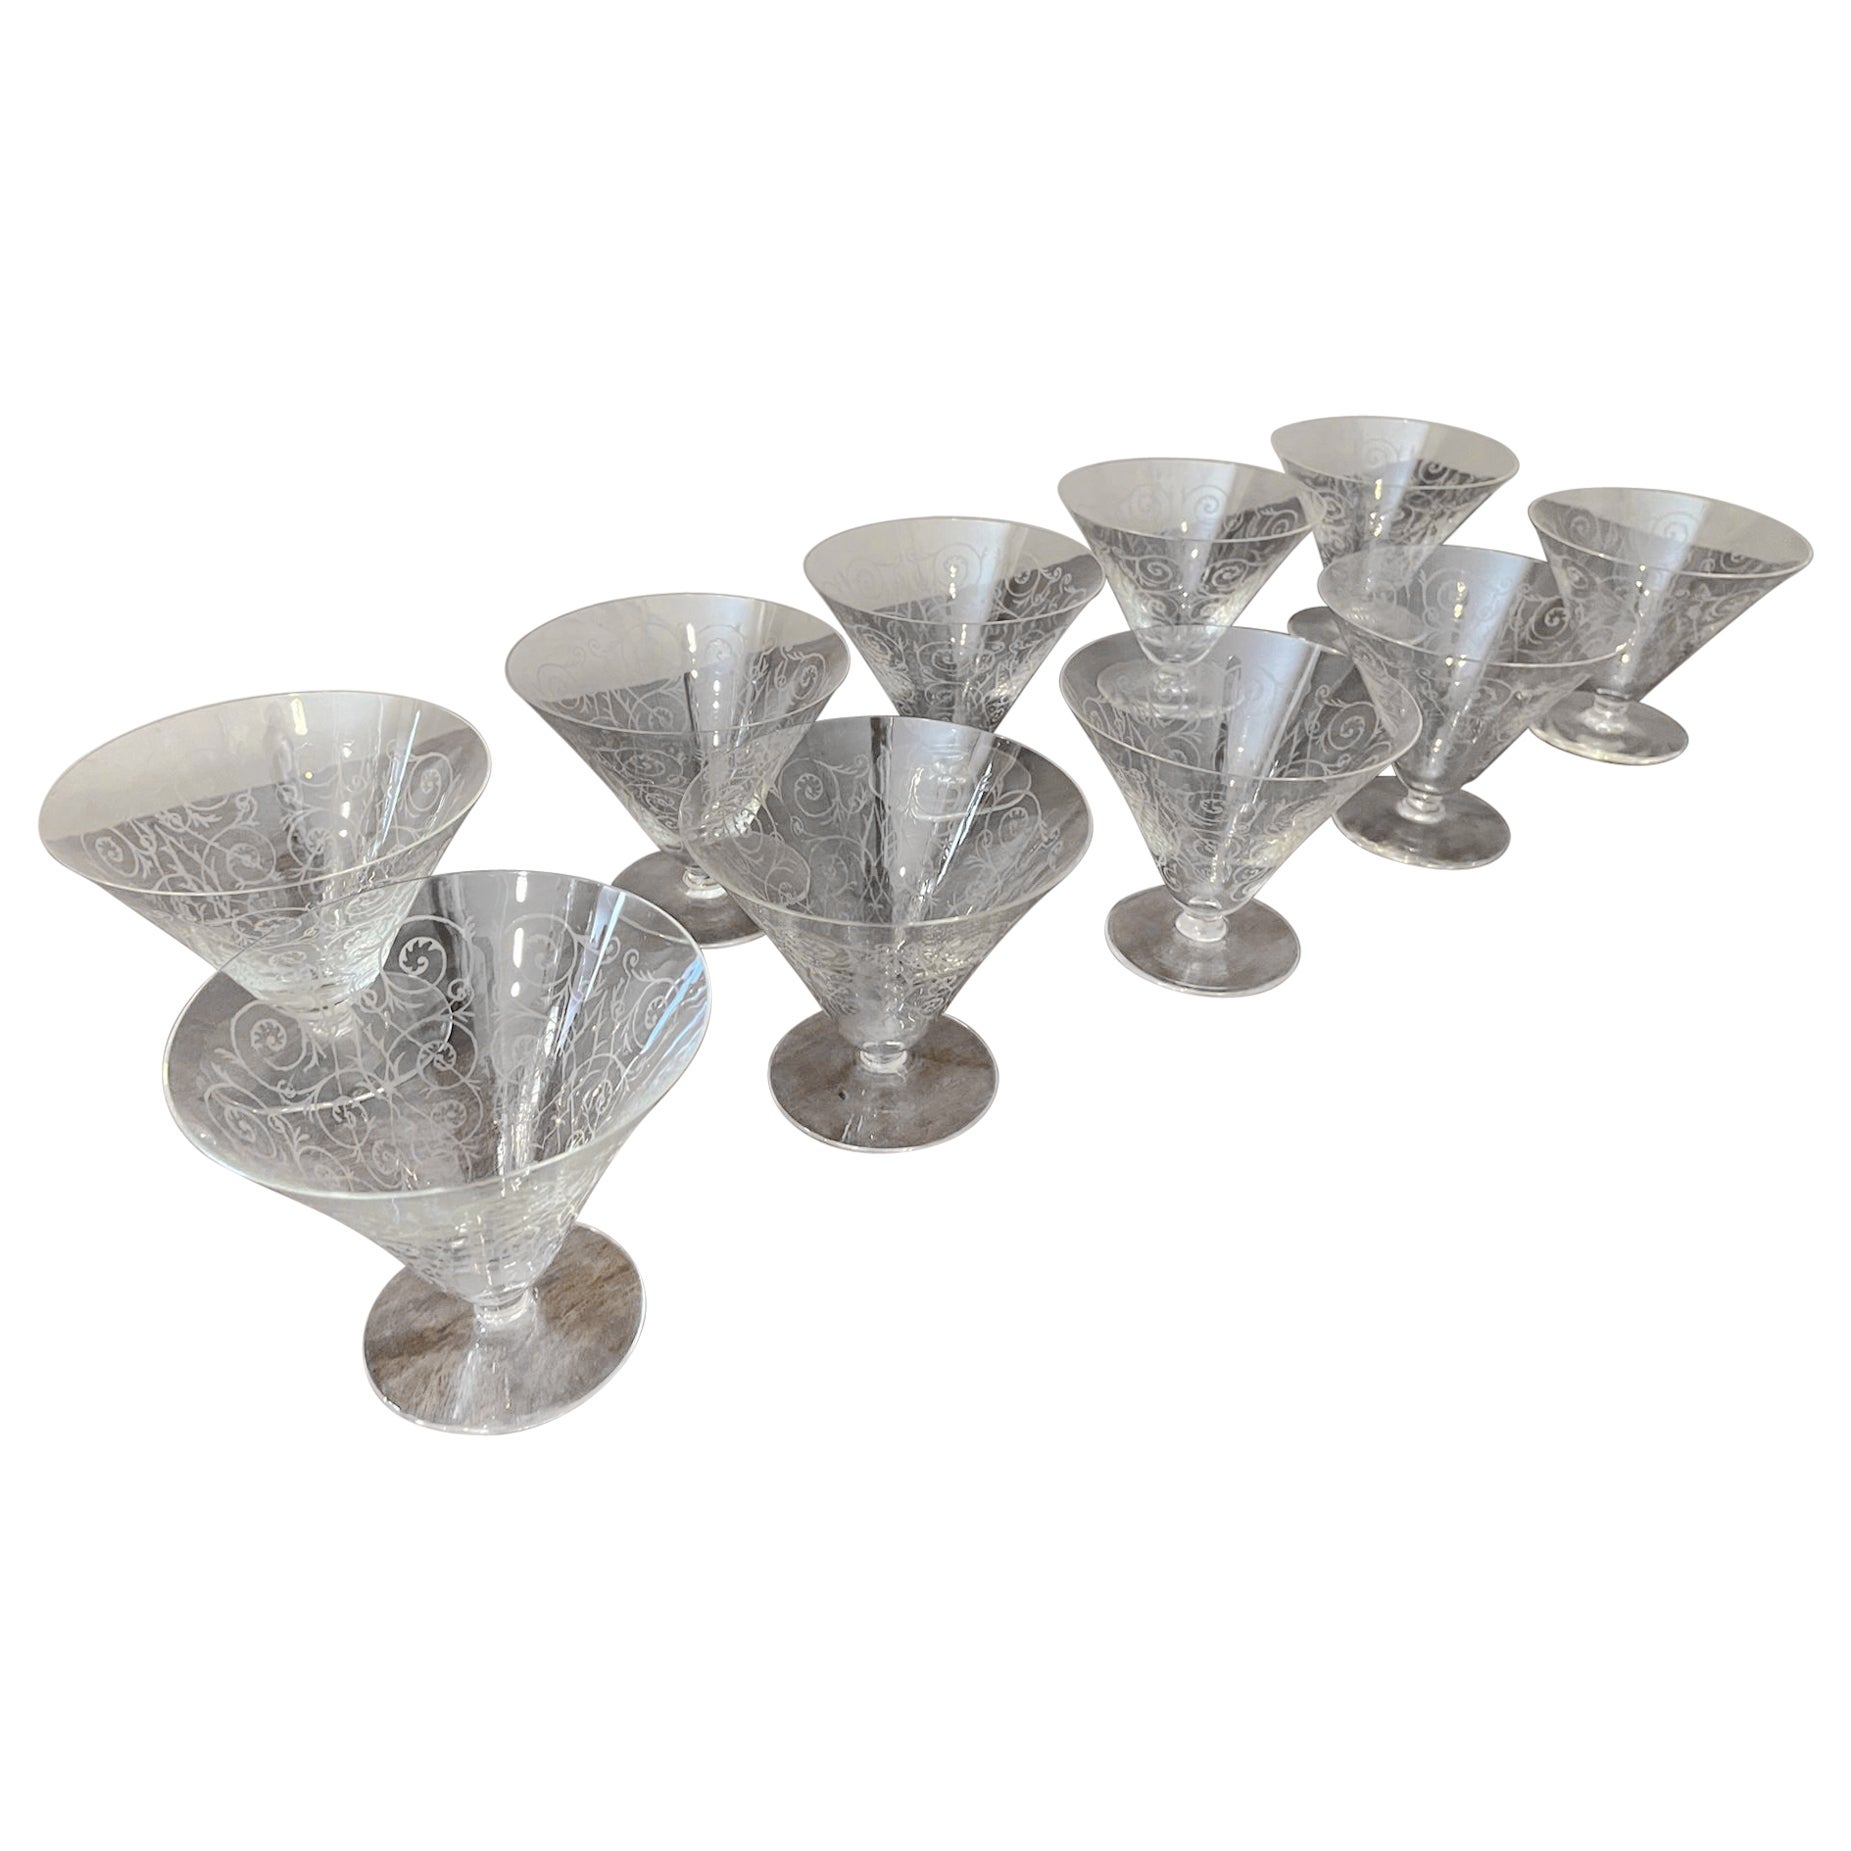 20th Century French Set of 10 Champagne Glasses in the Taste of Baccarat, 1930s For Sale